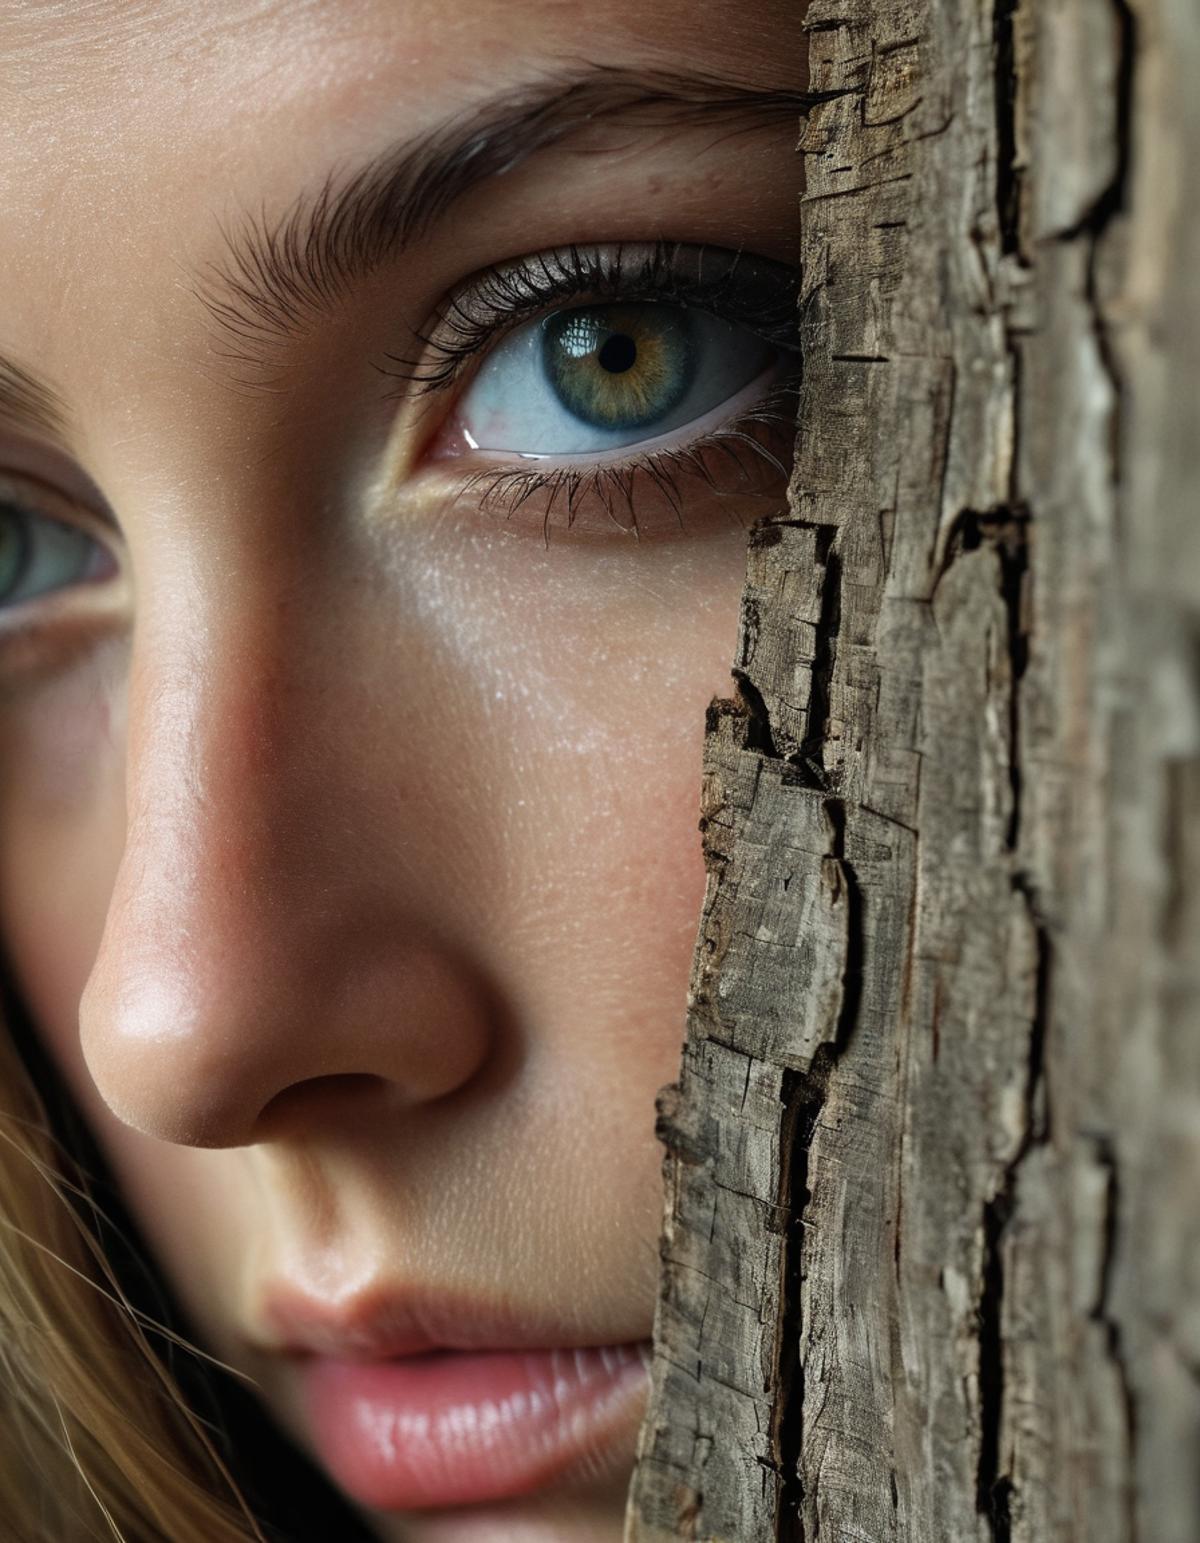 A close up of a woman's face with blue eyes and her nose against a tree bark.